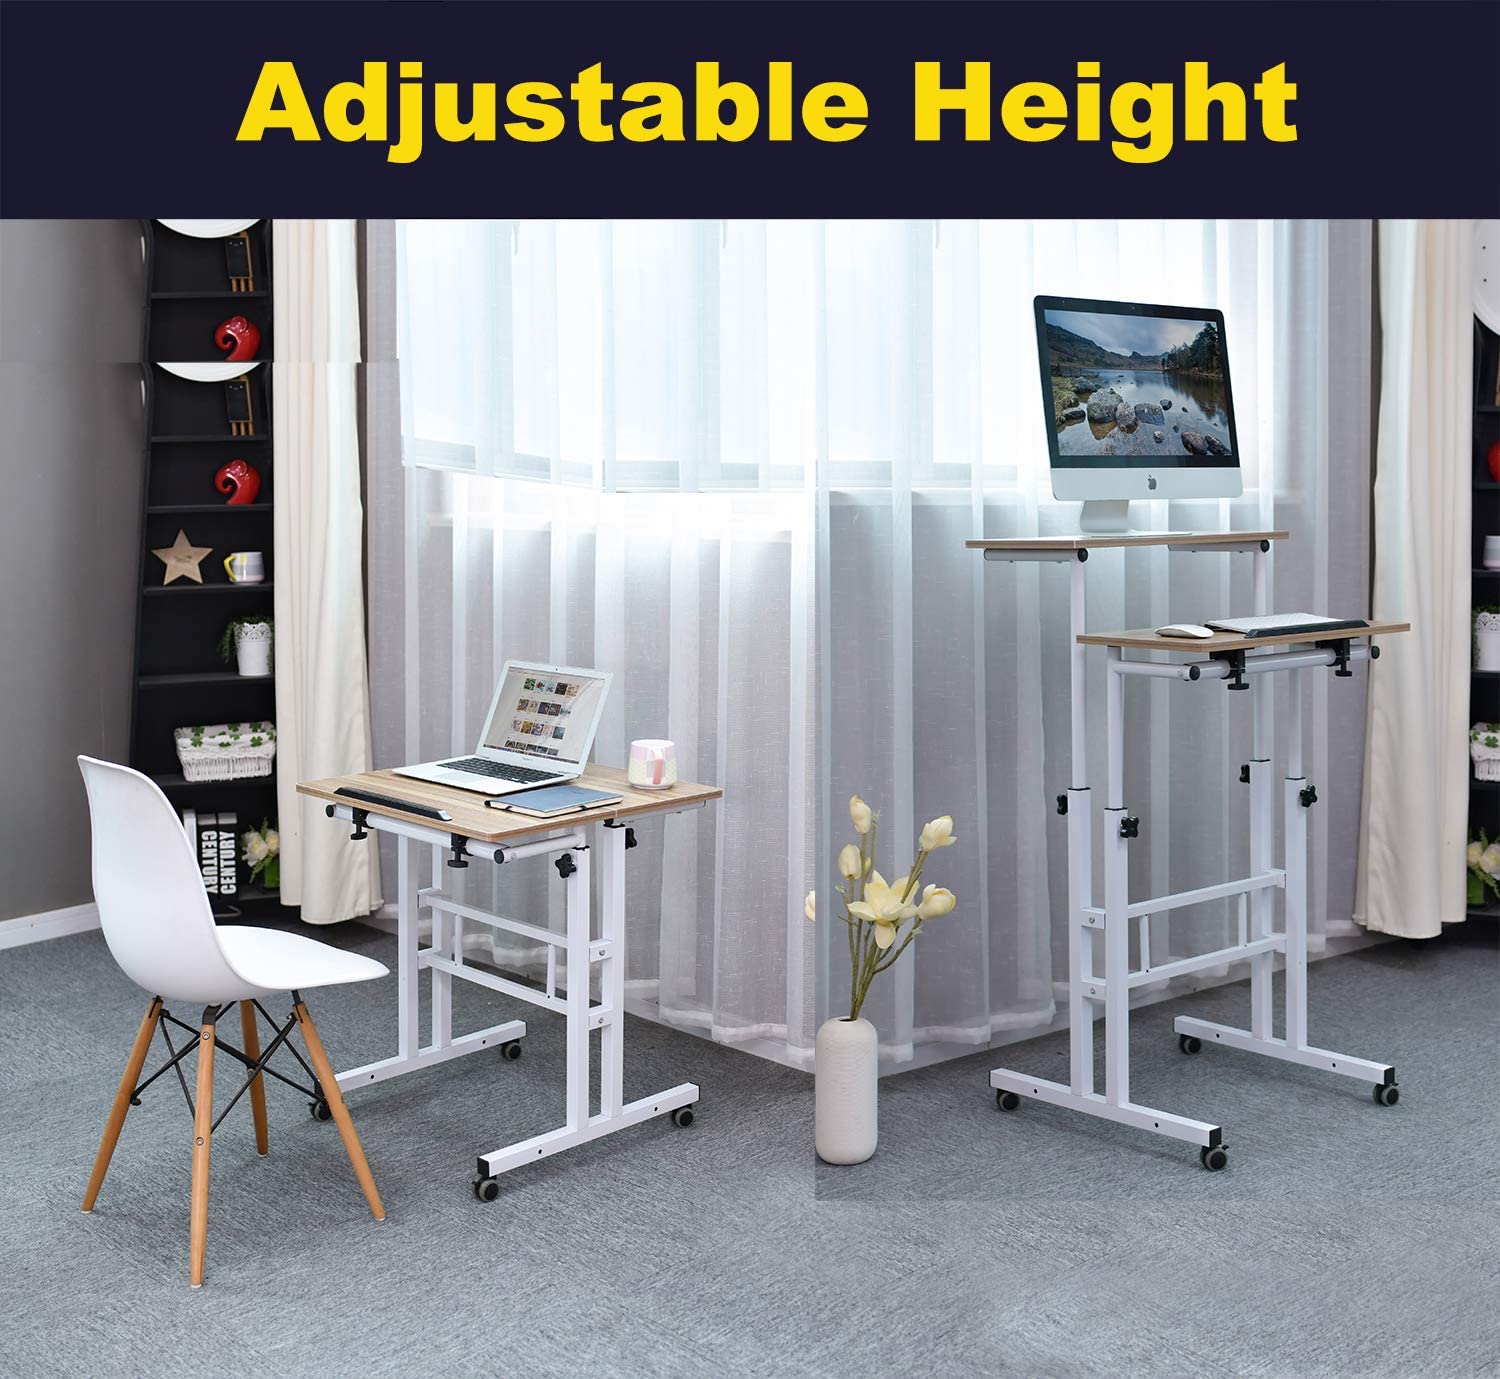 A collage of two images showing an adjustable standing desk. One image shows the table folded down to form a desk and the other image shows the table unfolded as a standing desk. The text reads, 'Adjustable height.'